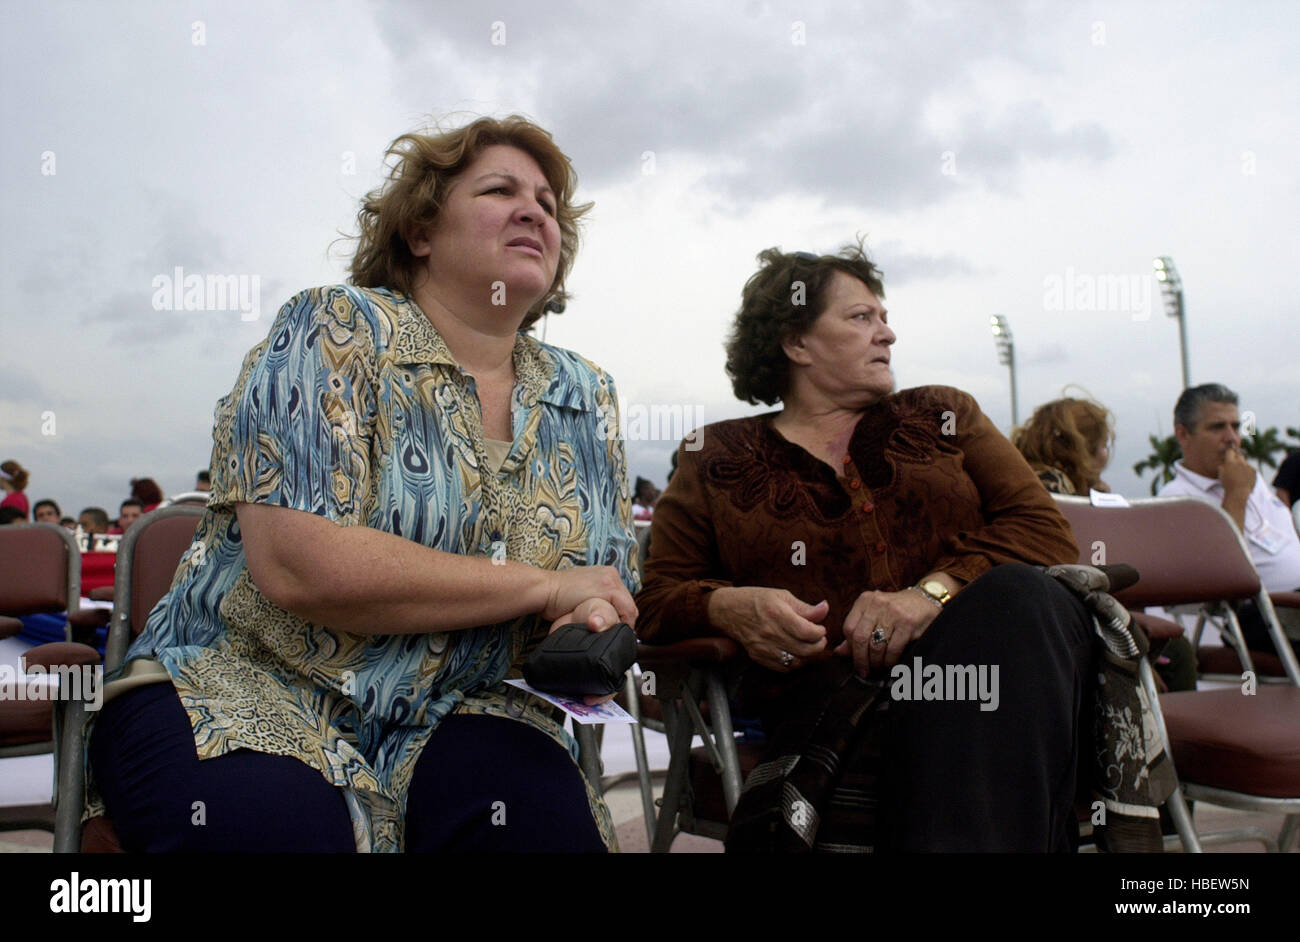 FILE PHOTO / Aleida March (R), wife of Ernesto Guevara (Che Guevara), and her daughter Aleida Guevara are seen next to the monument of 'The Che', County of Santa Clara, 23.01.2000. Credit: Jorge Rey/MediaPunch Stock Photo